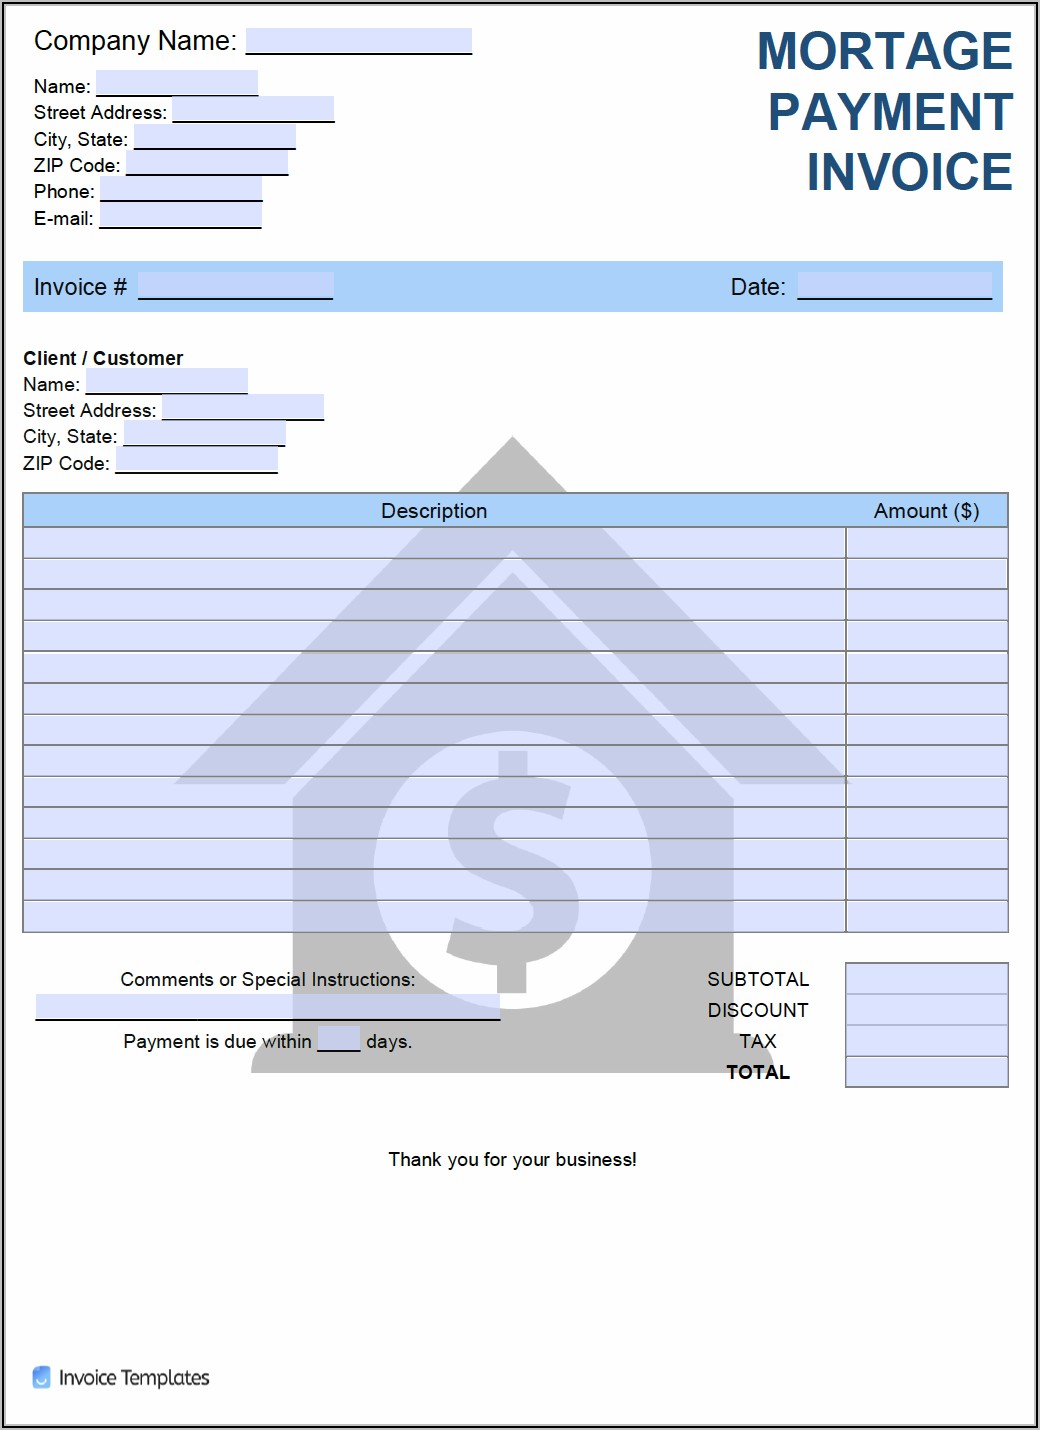 Loan Repayment Invoice Template